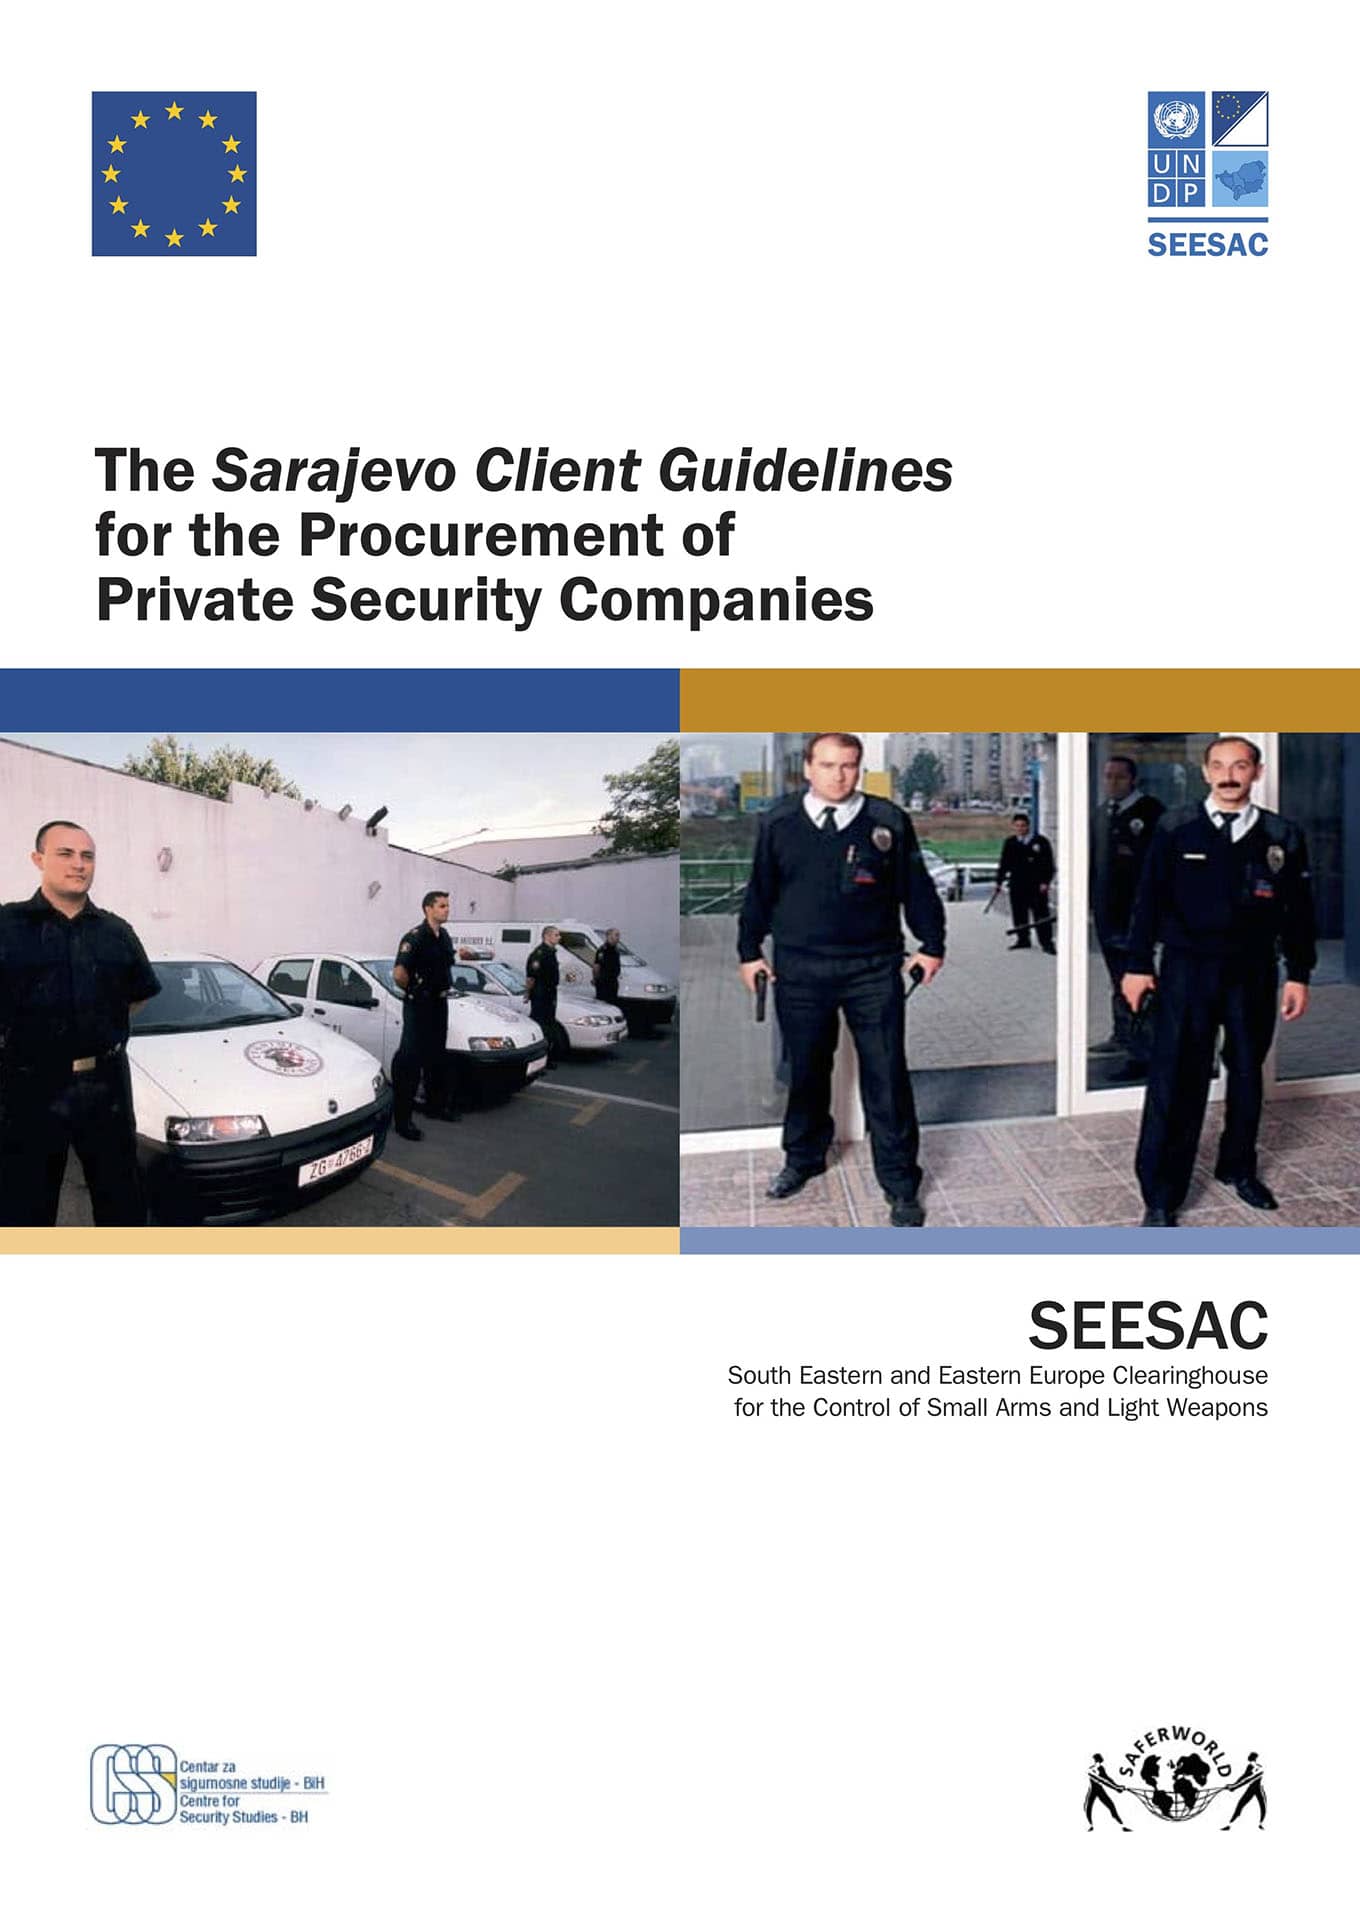 The Sarajevo Client Guidelines for the Procurement of Private Security Companies (SEESAC, 2006)